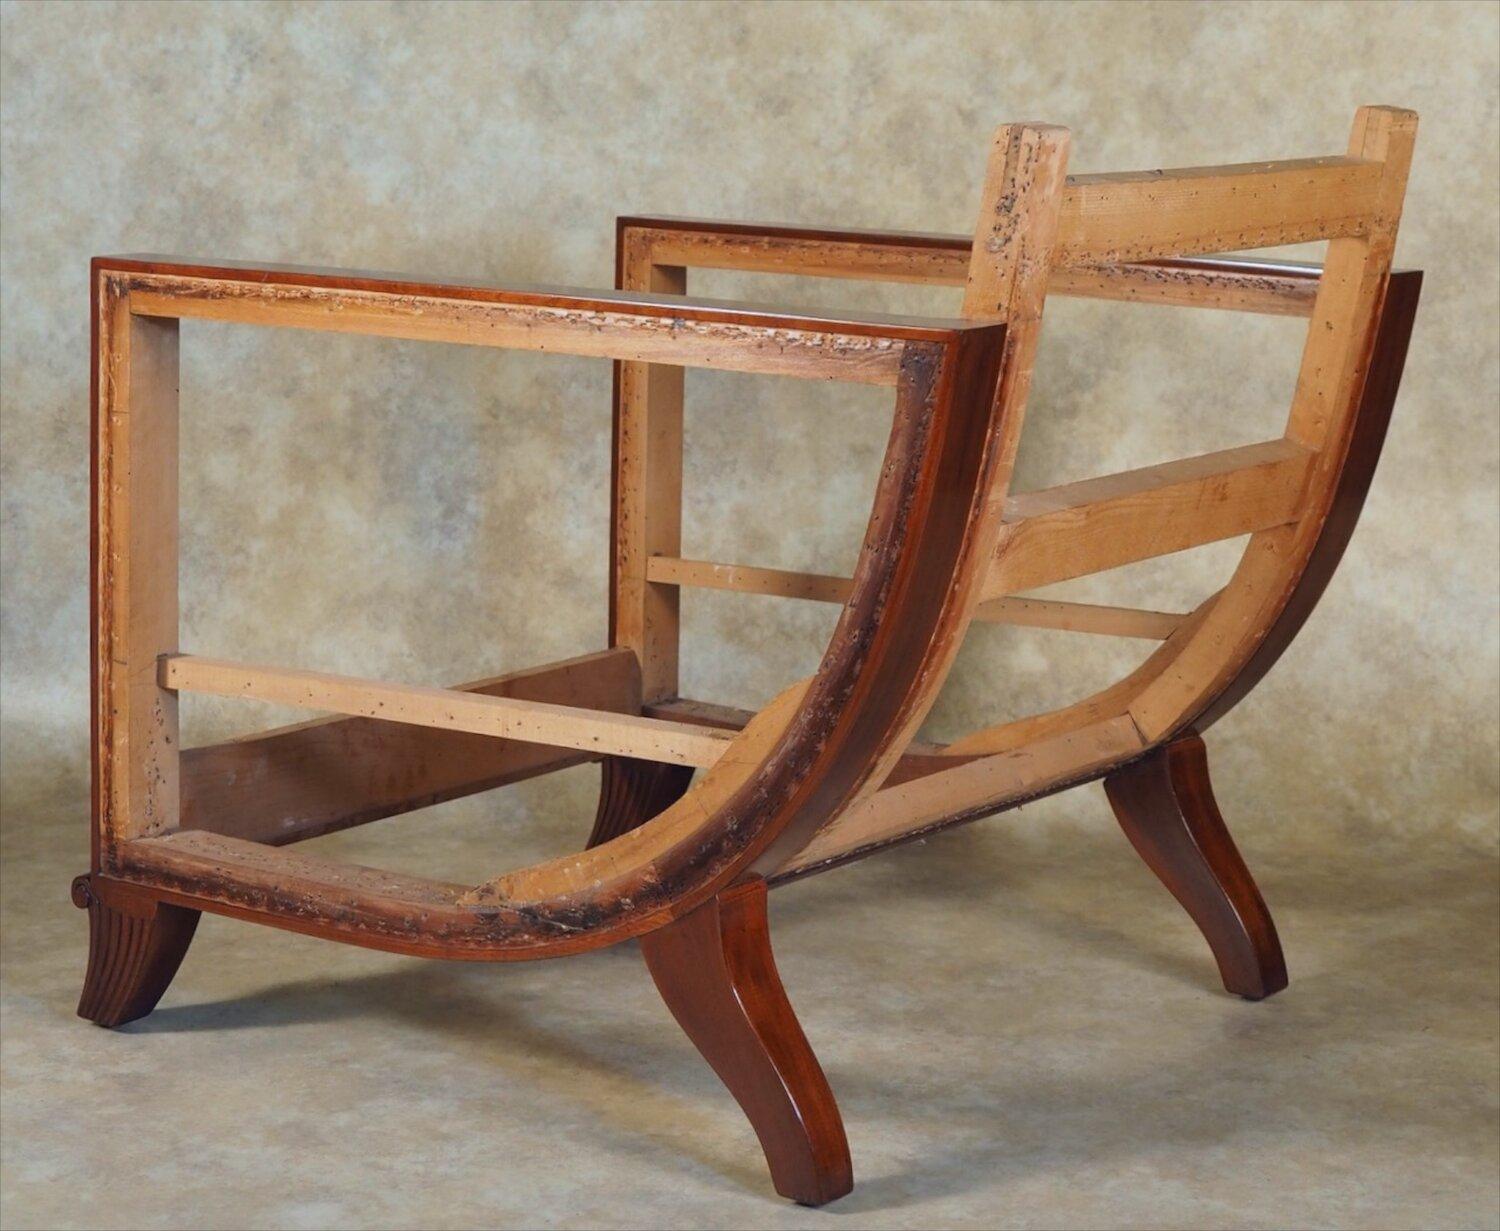 Classic French Art Deco armchair/club chair by Ruhlmann, circa 1918-1920, in mahogany and burled mahogany. A variant of the “Hydravion Berger” armchair with sculpted front legs.

Measures: 29